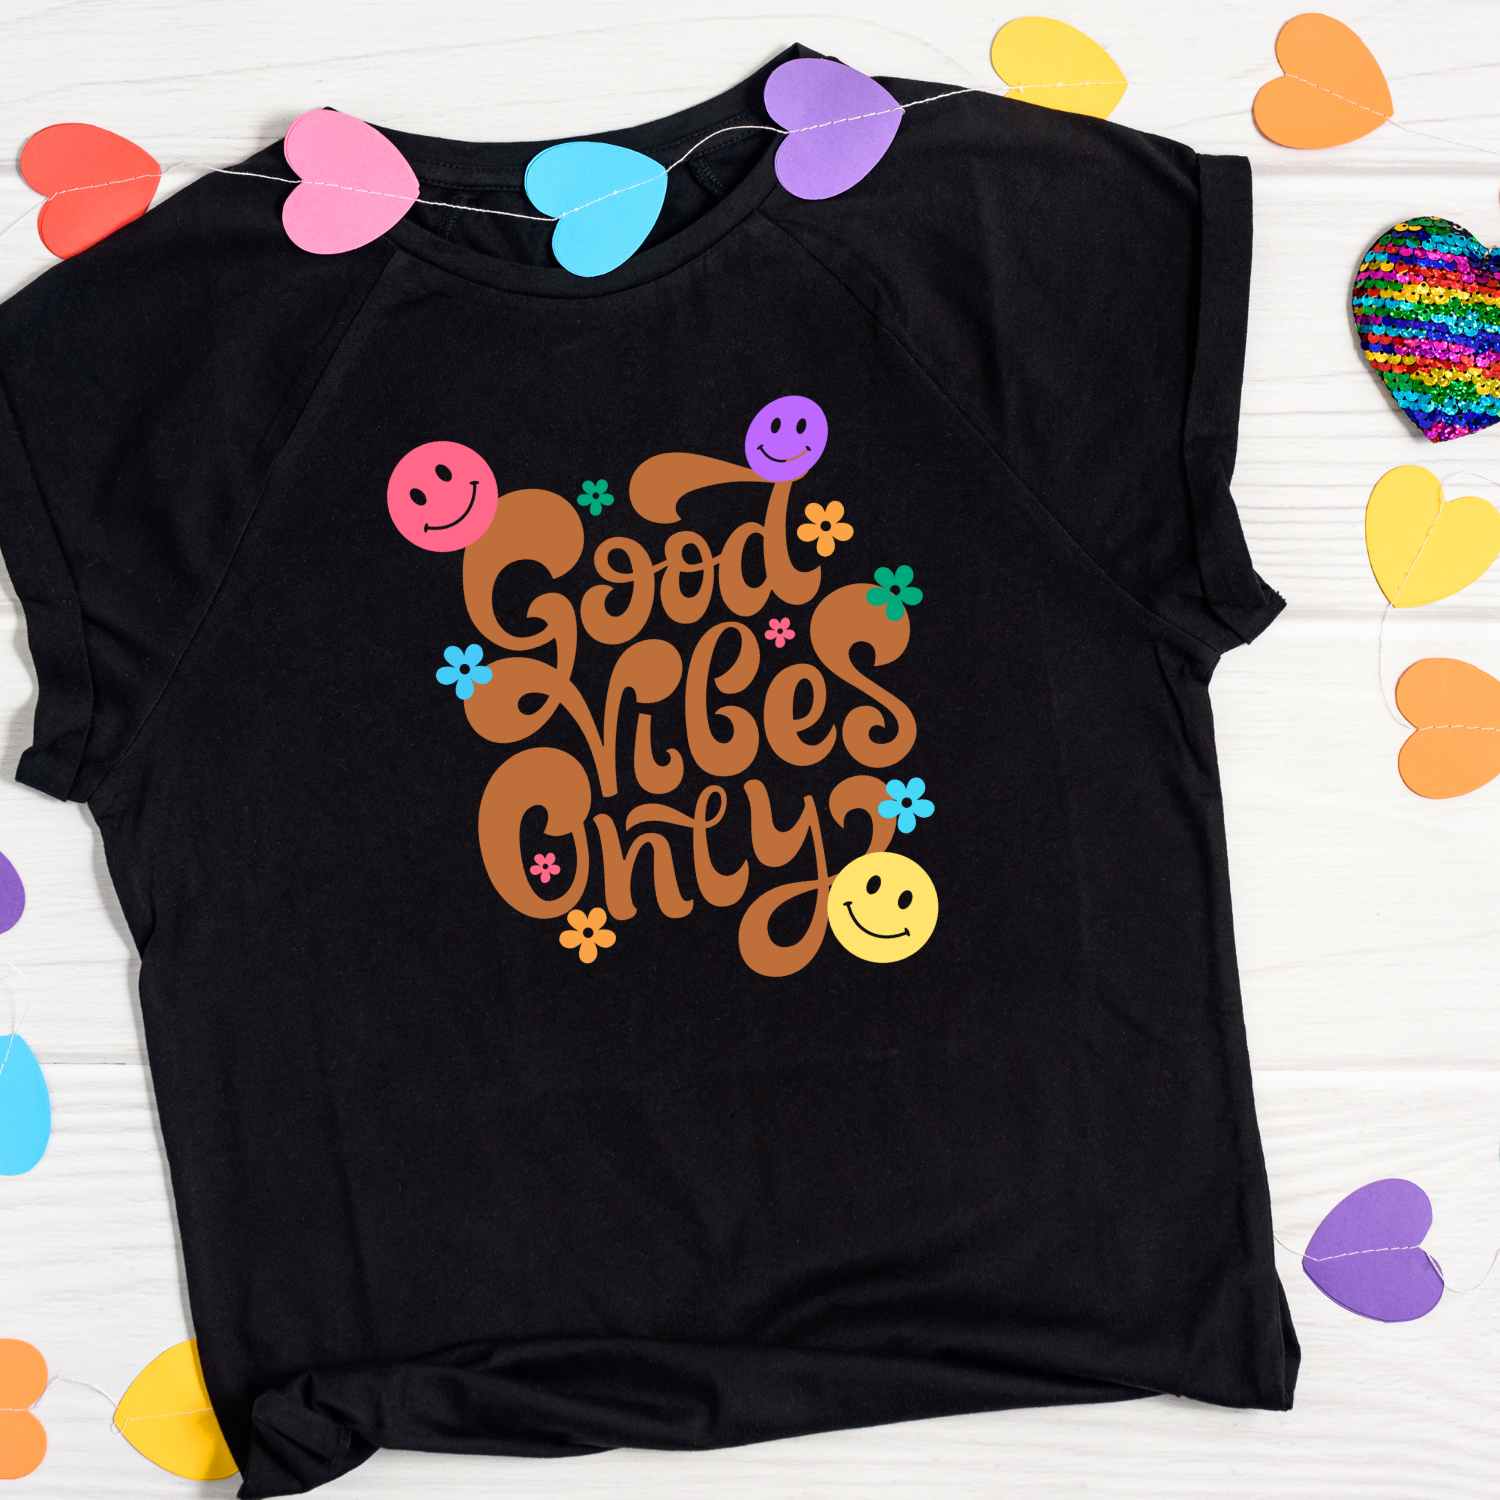 Good Vibes Only - Groovy Style T-shirt Design